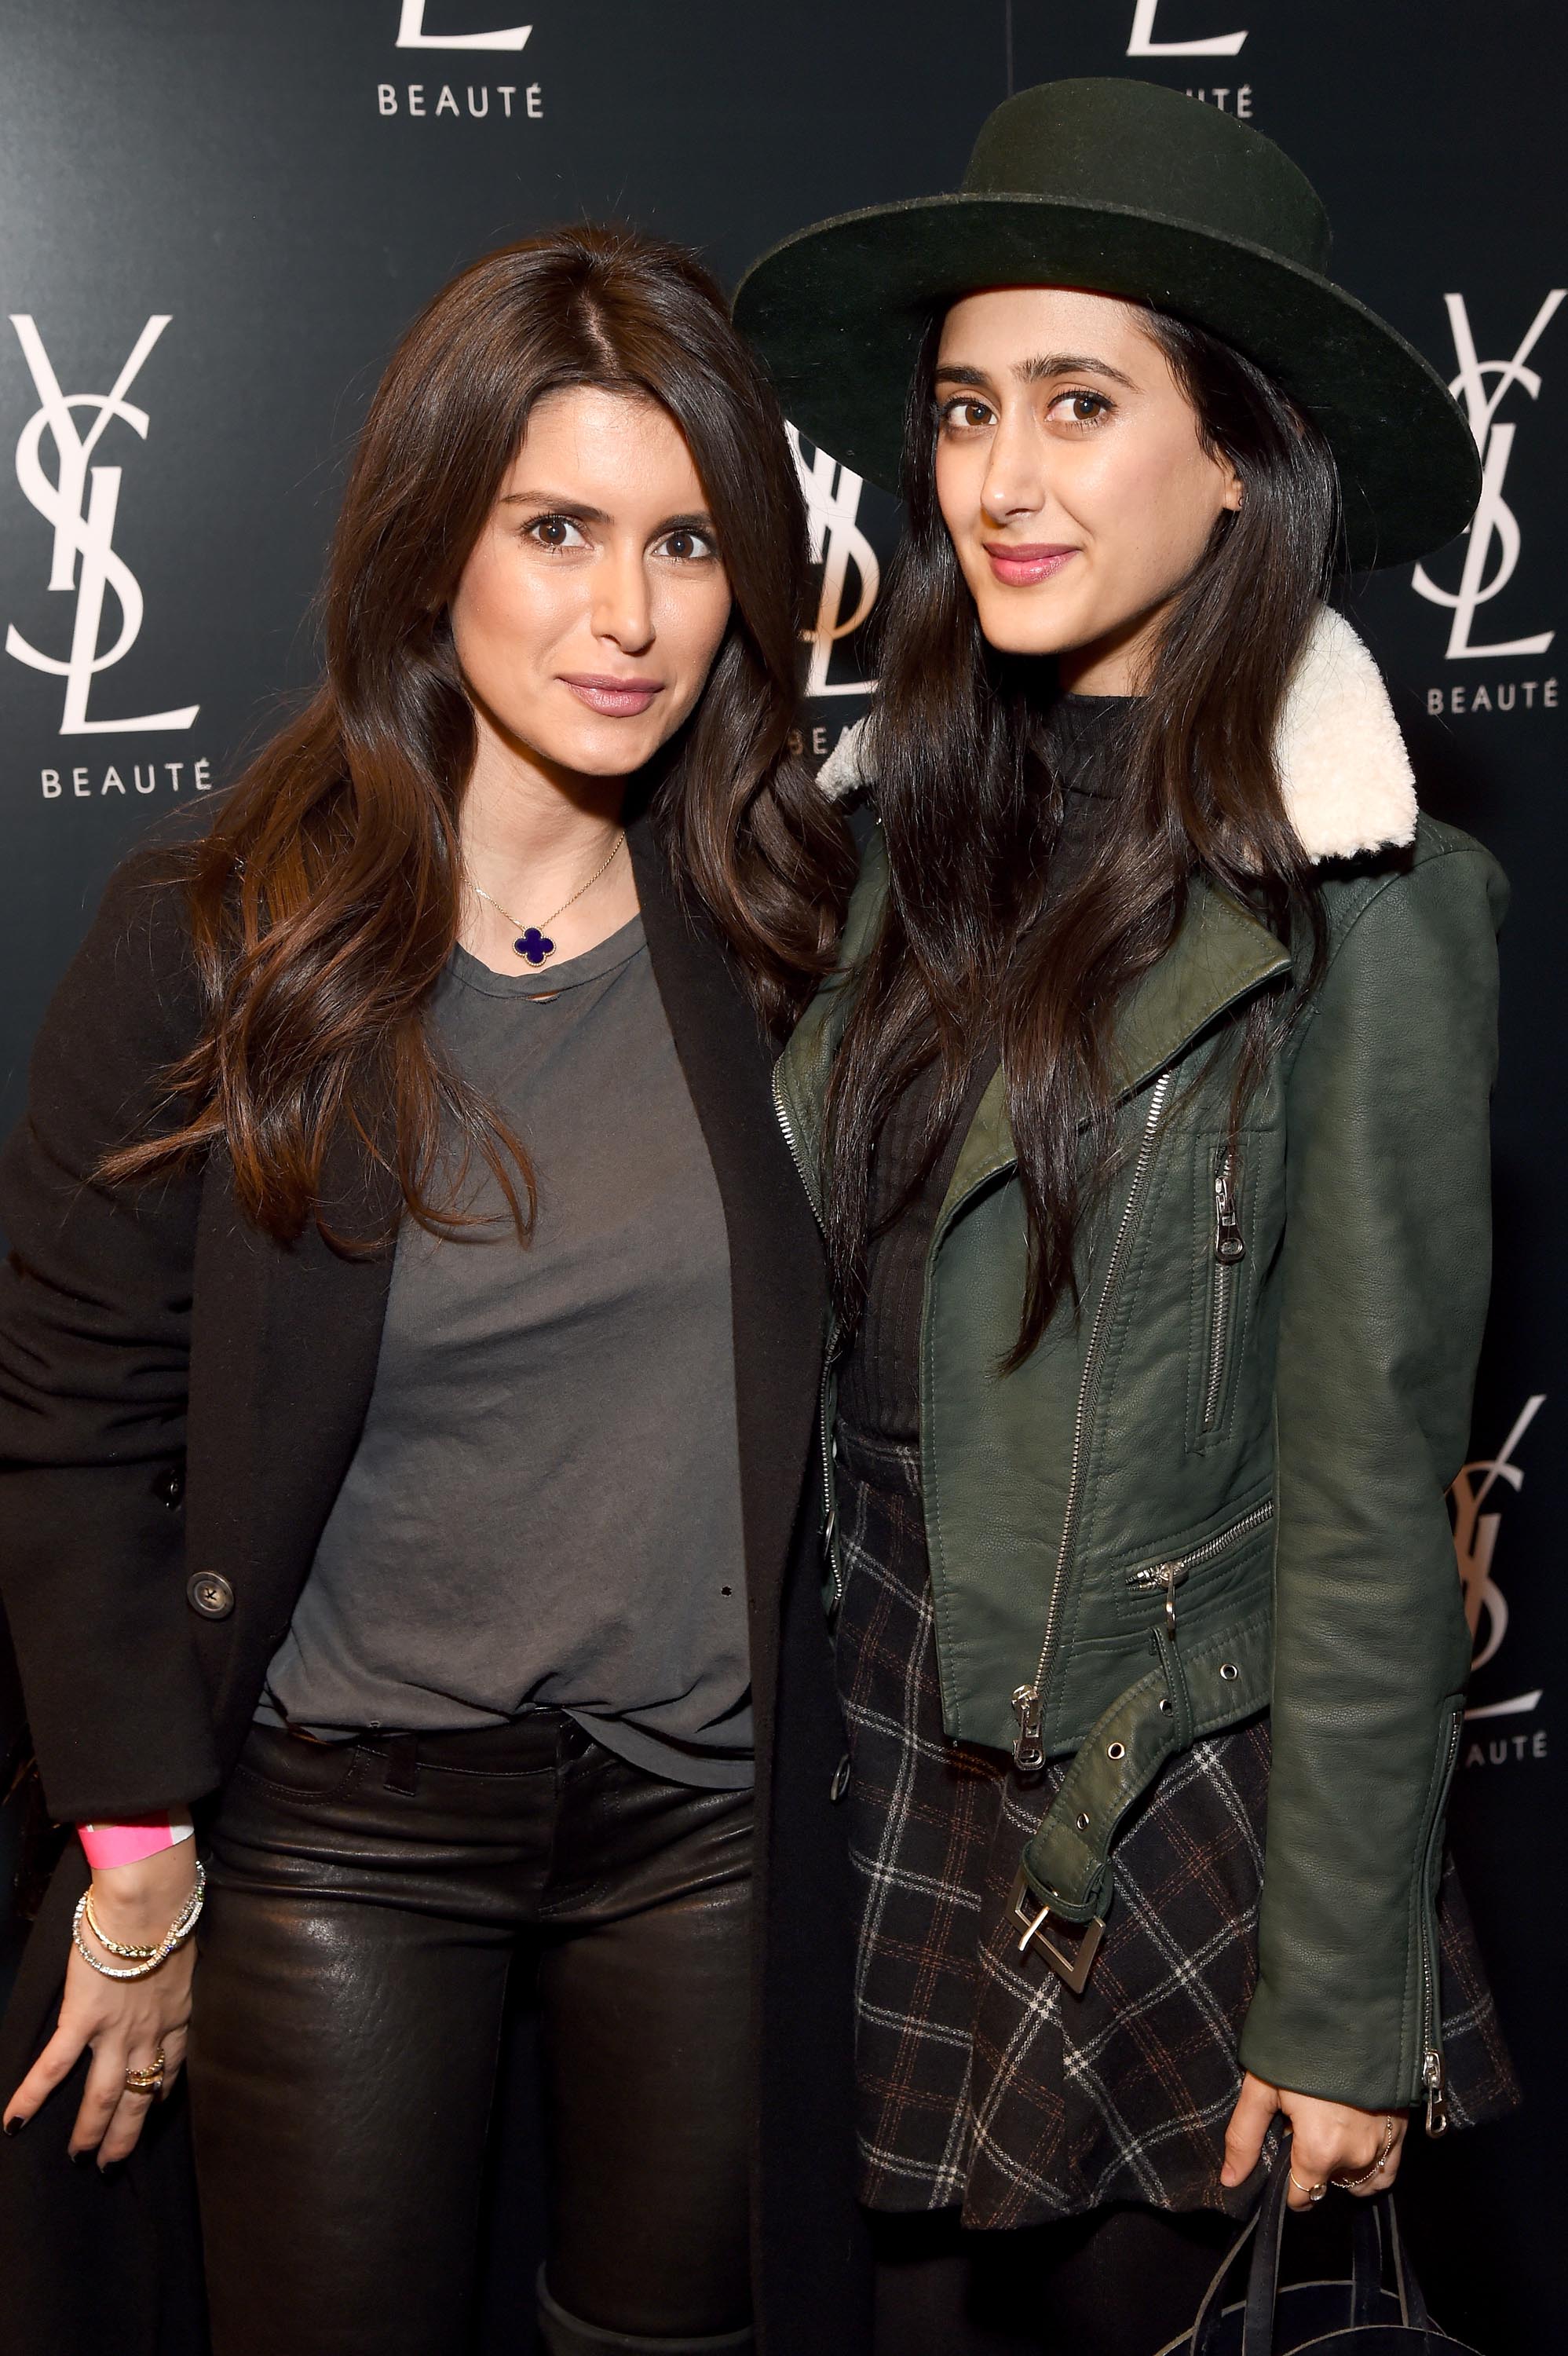 Roxy Sowlaty attends the YSL Beauty Club Party